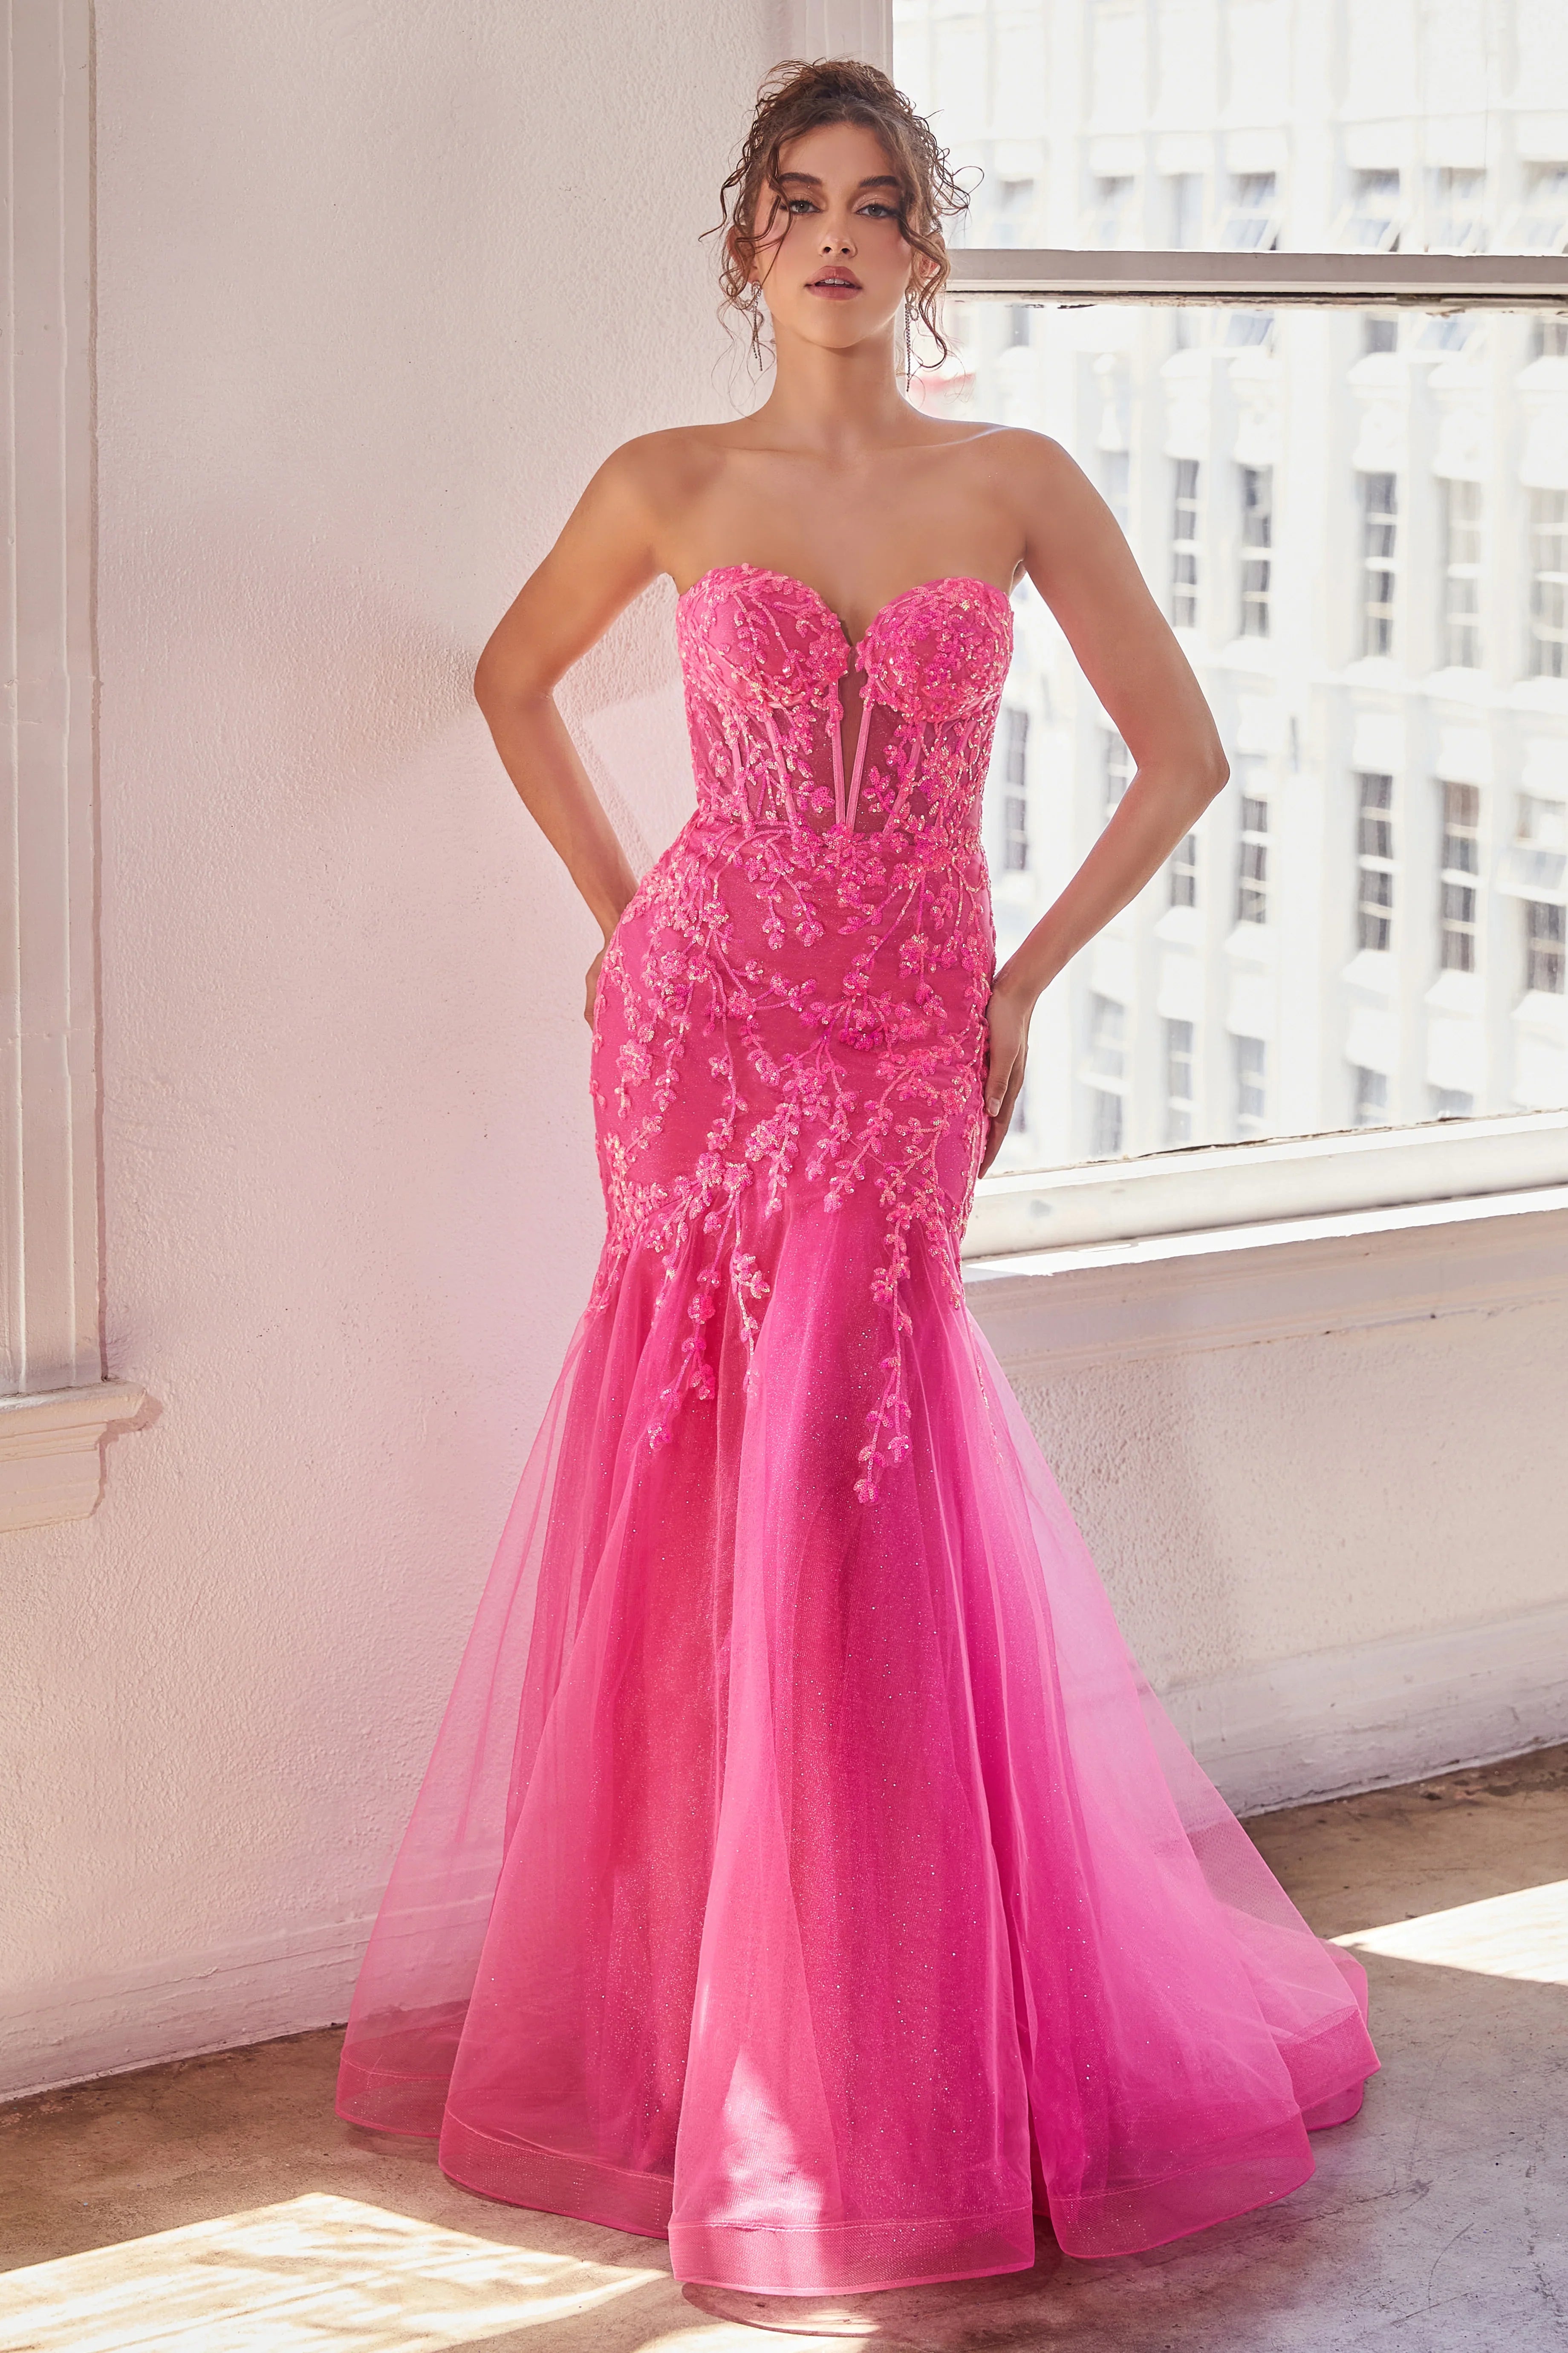 Long Sequin-Pattern Prom Dress with Sheer Corset